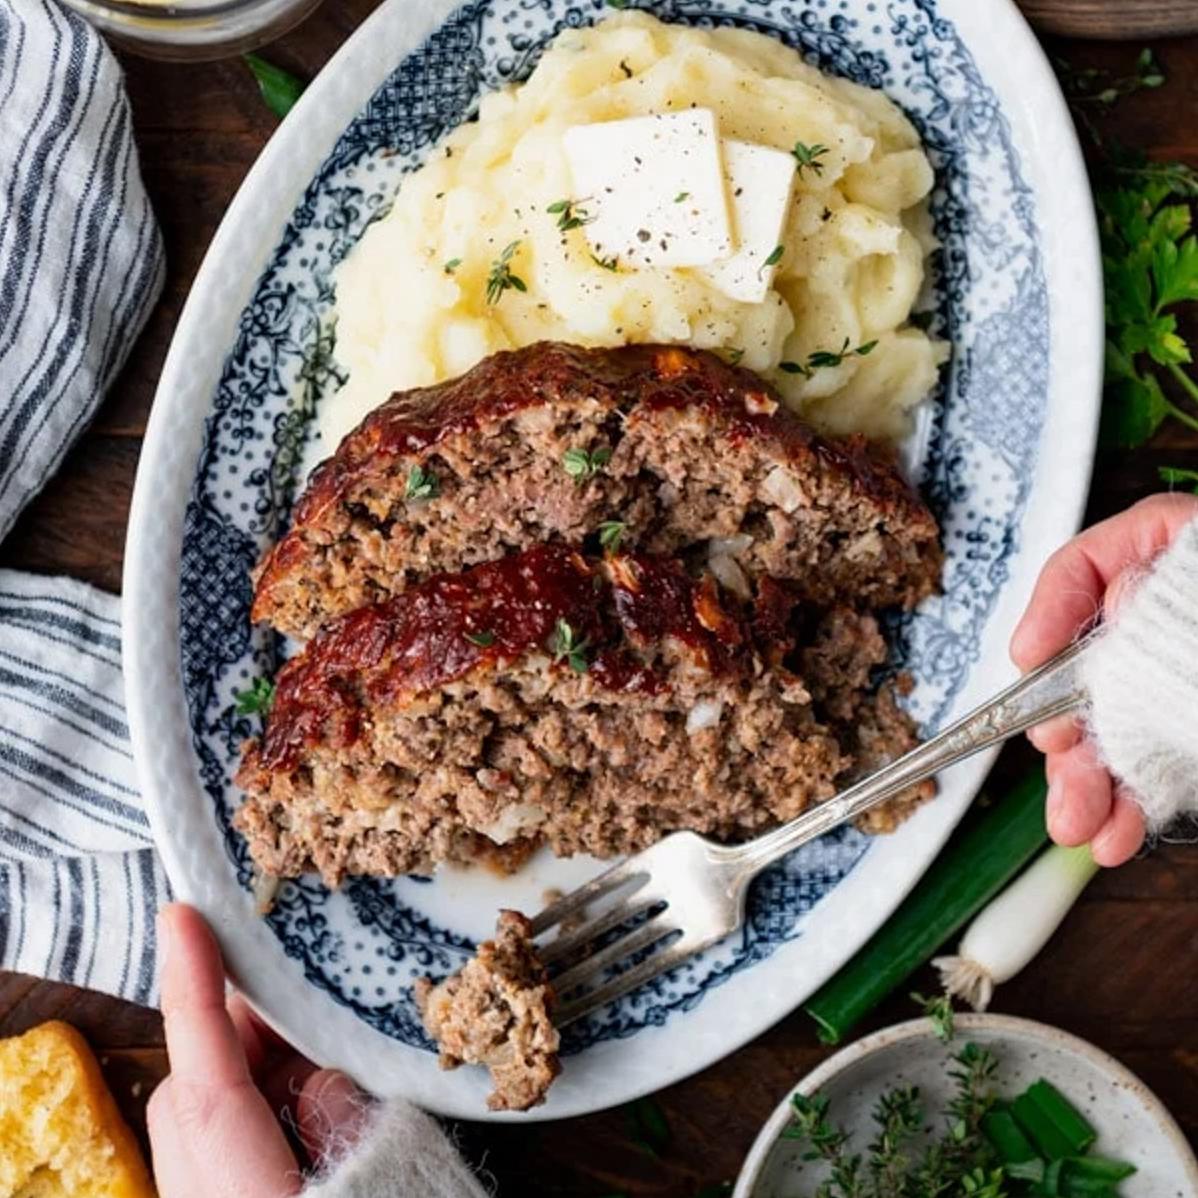  A meatloaf so good, it will make you wanna slap your mama!